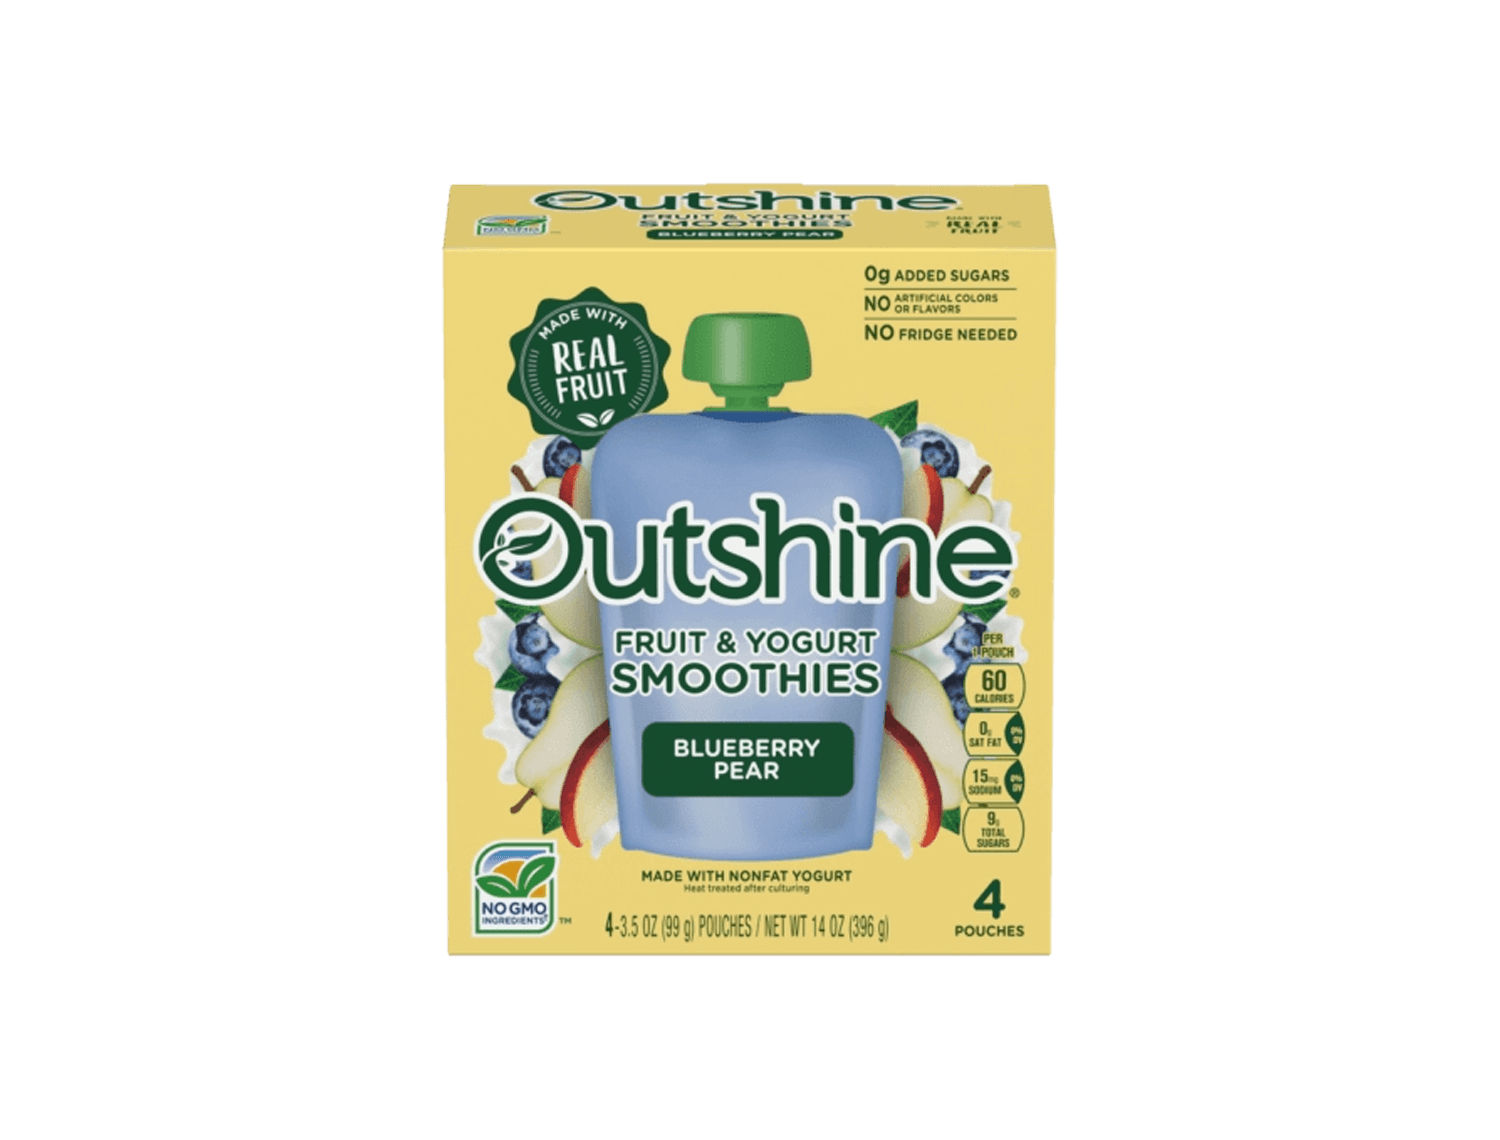 package of Outshine blueberry pear smoothies